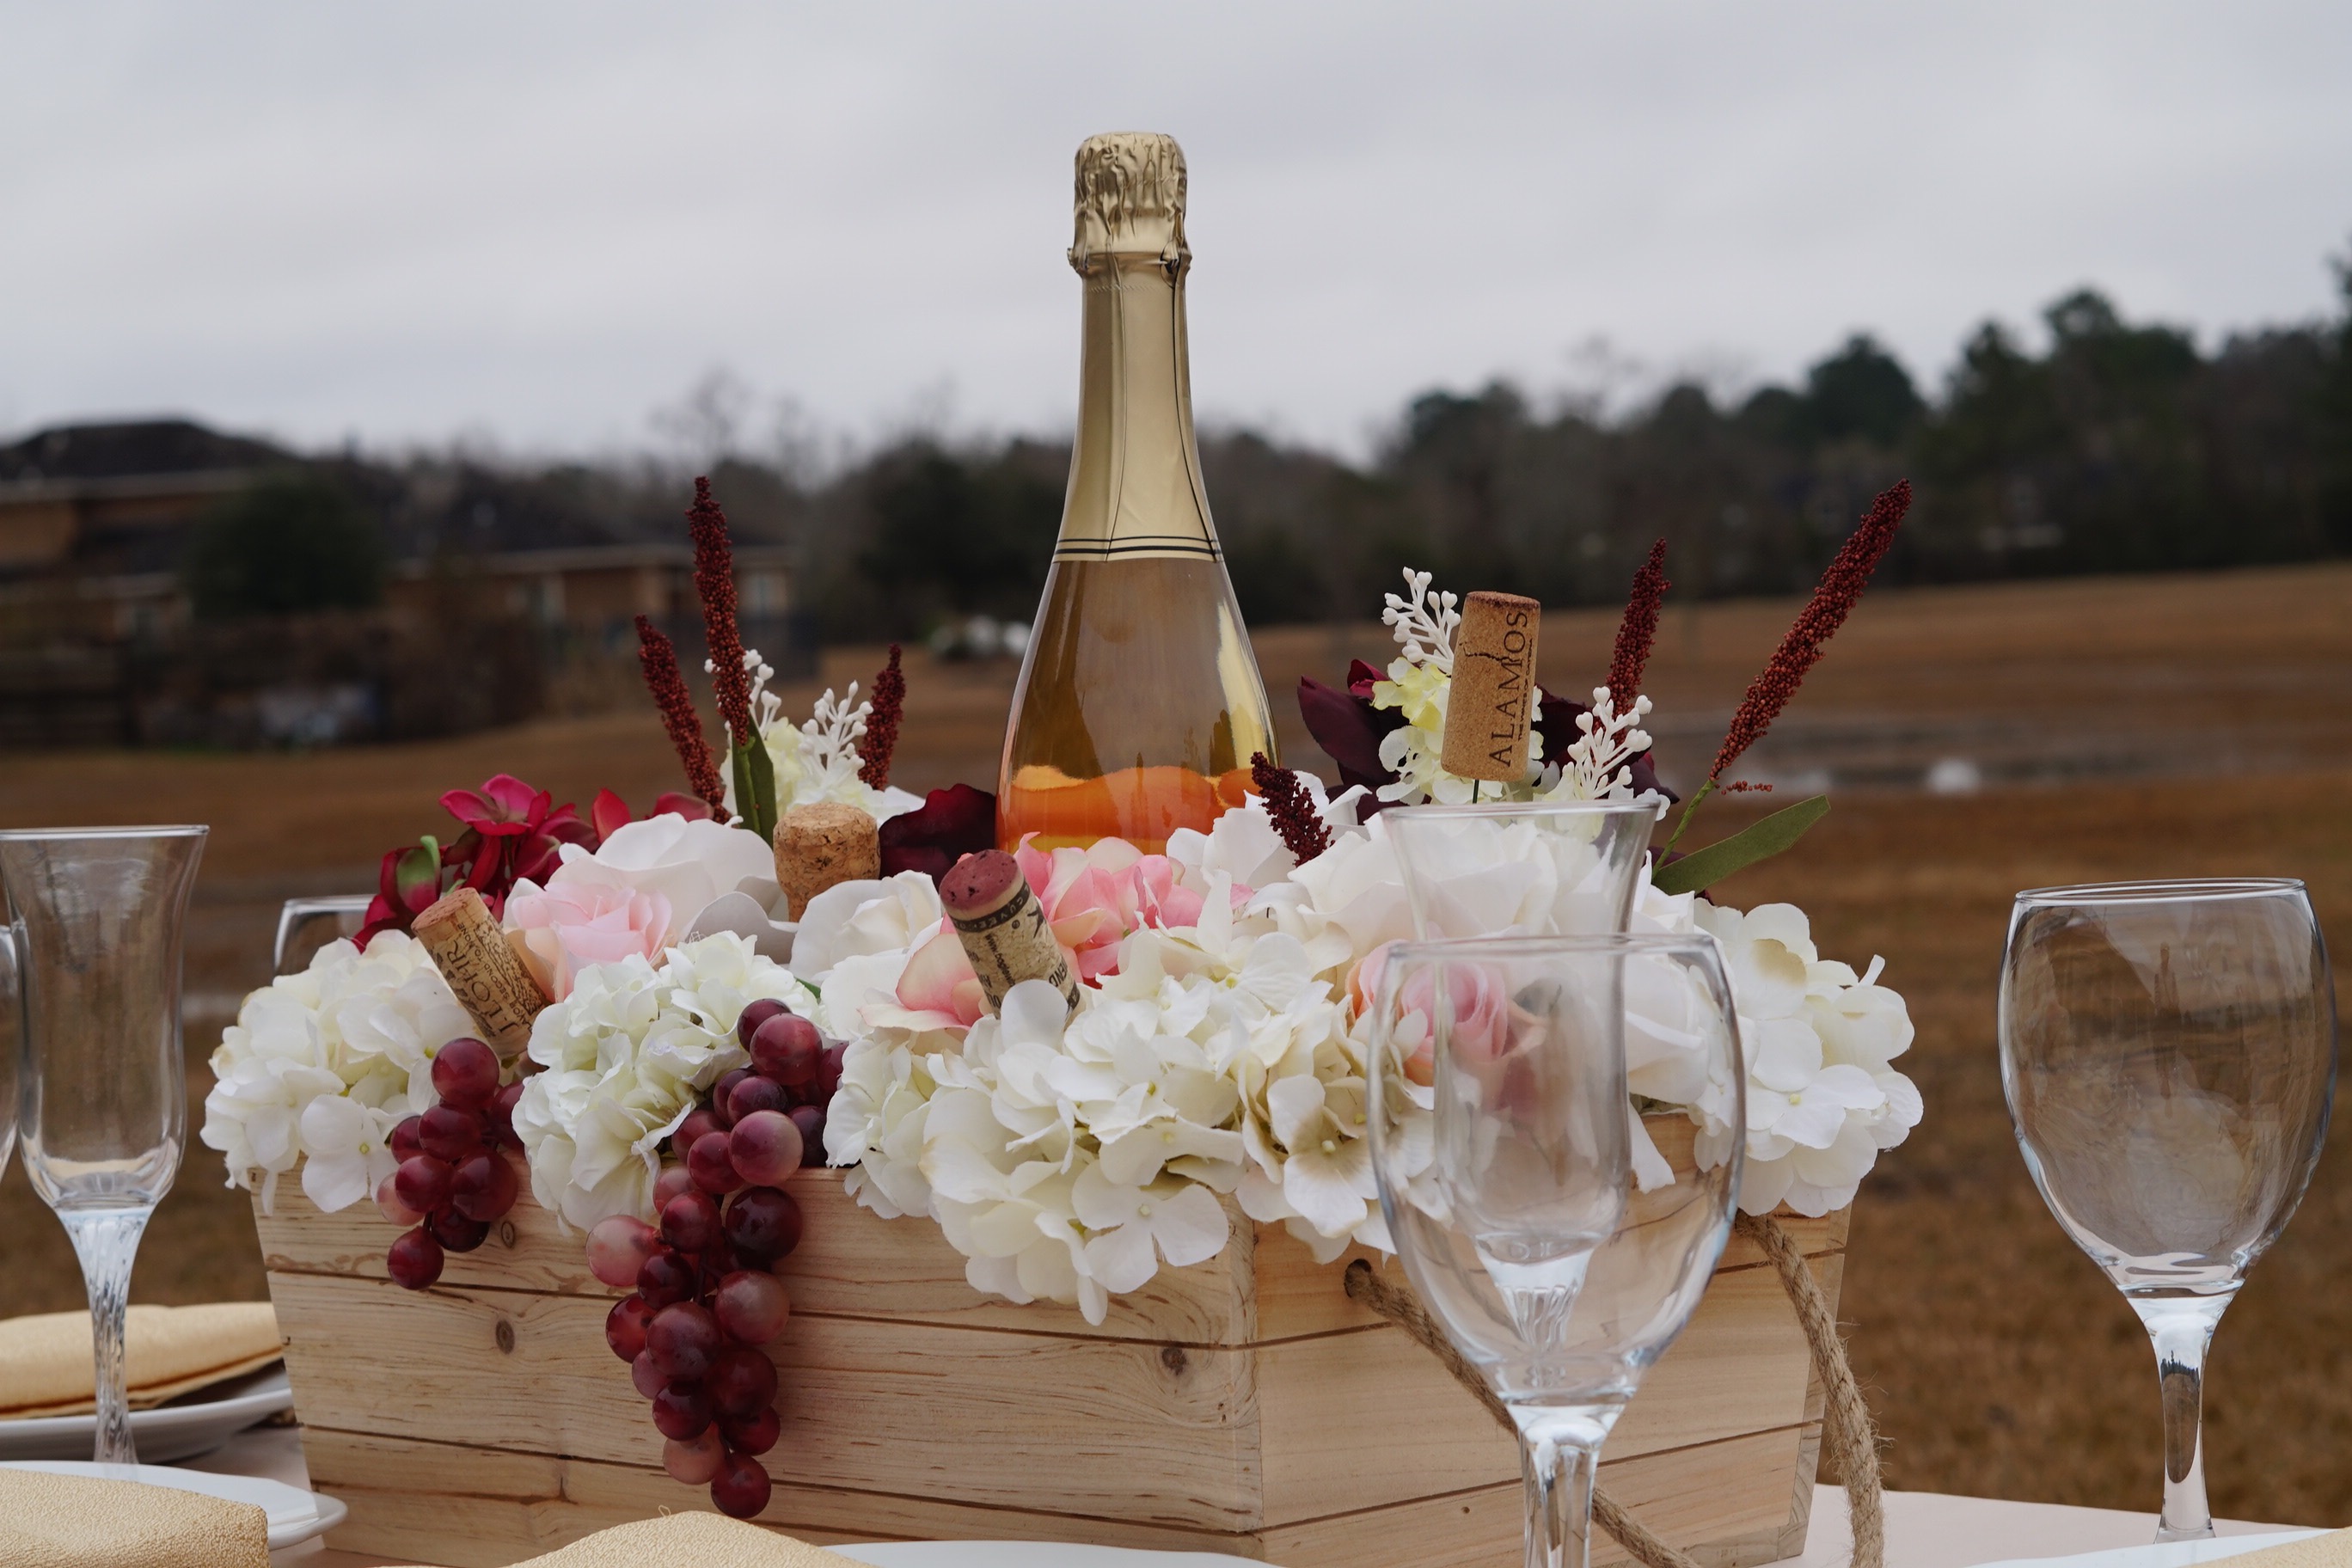 Rustic Wine Themed Wooden Crate Diy, Small Wooden Boxes For Wedding Centerpieces